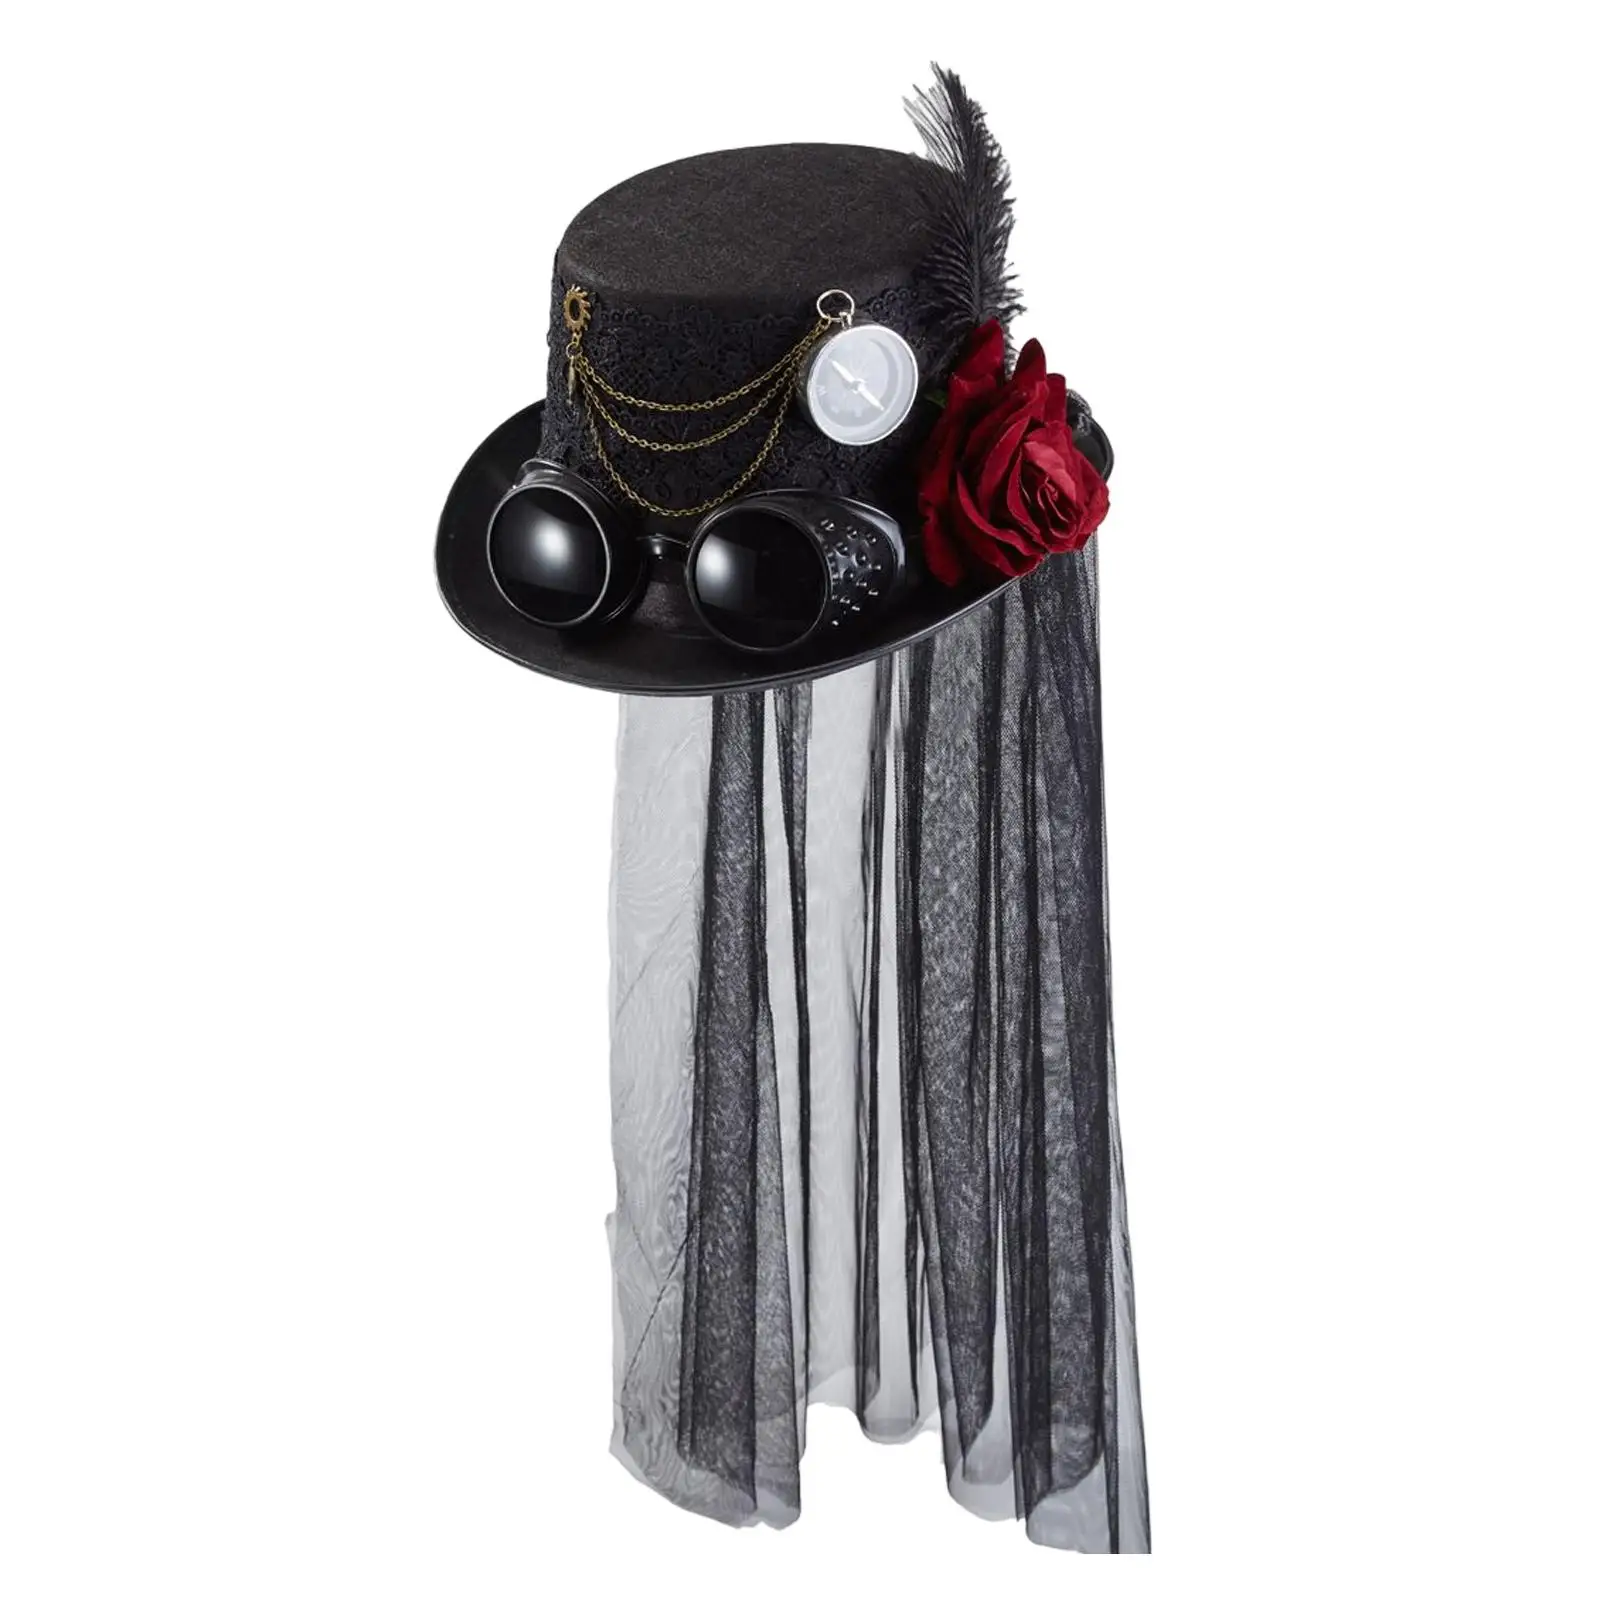 Steampunk Top Hat Gothic Vintage Head Gear Flower Feather Decorative with Goggles Headband Headwear Fedoras for Supplies Adult